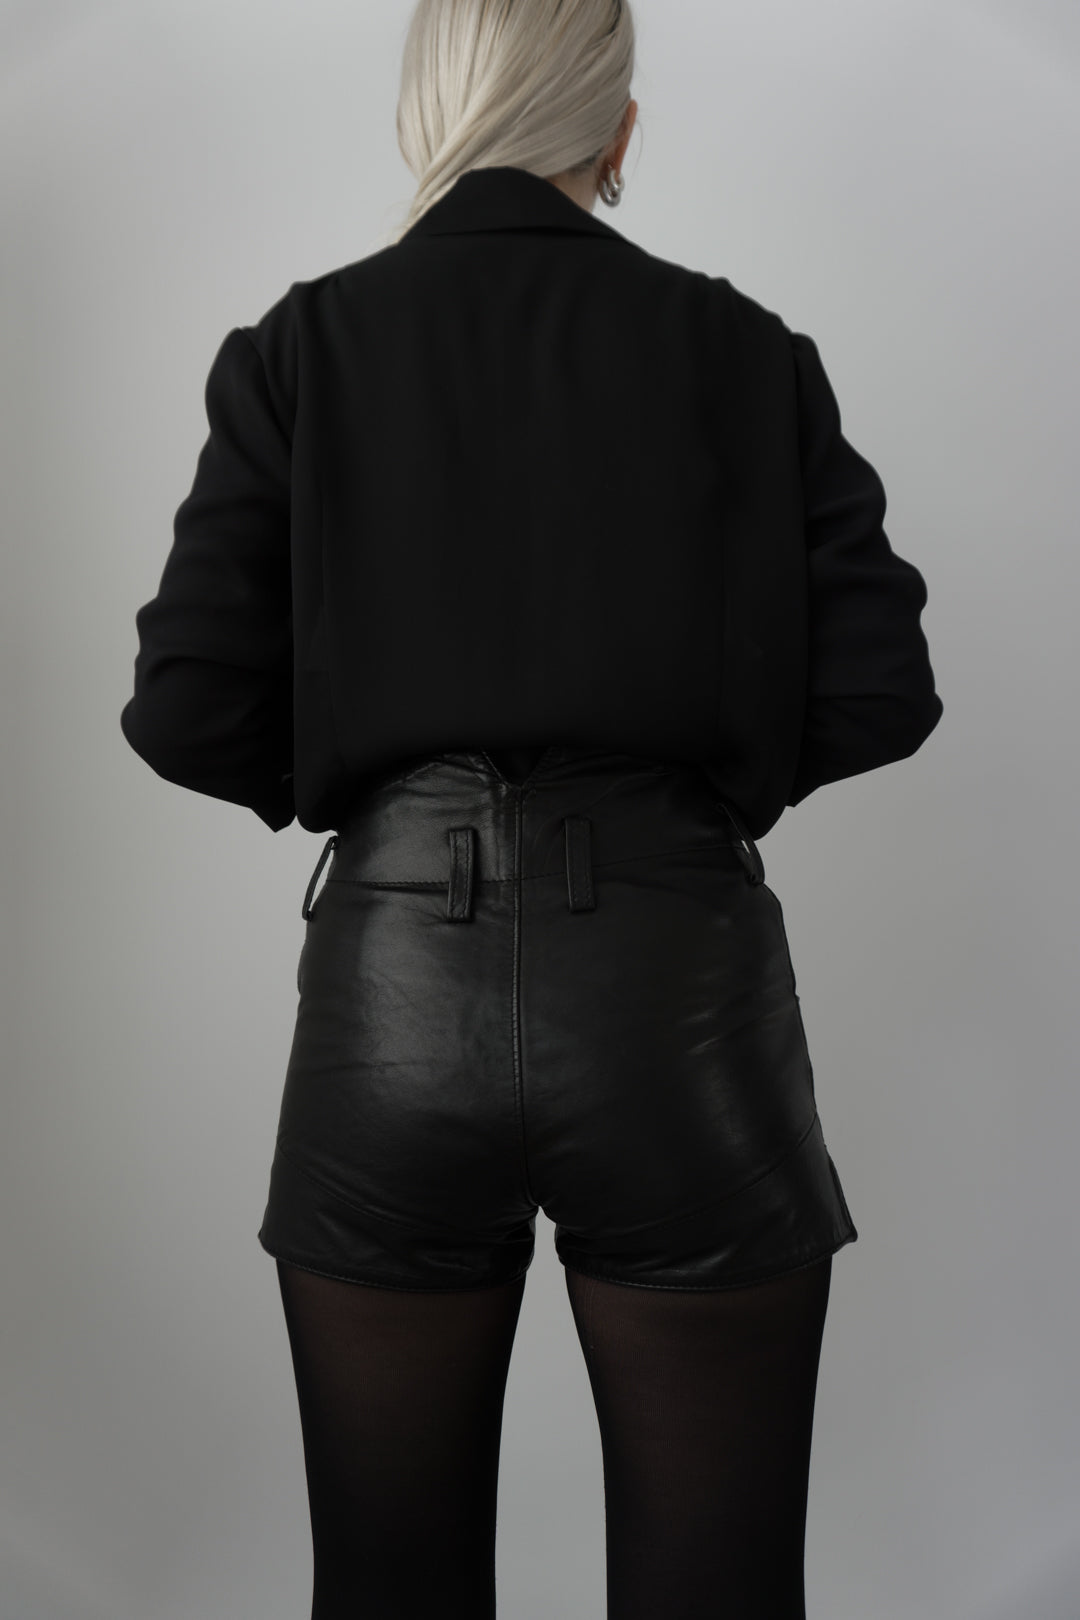 Leather shorts, Pyrate Style, 36